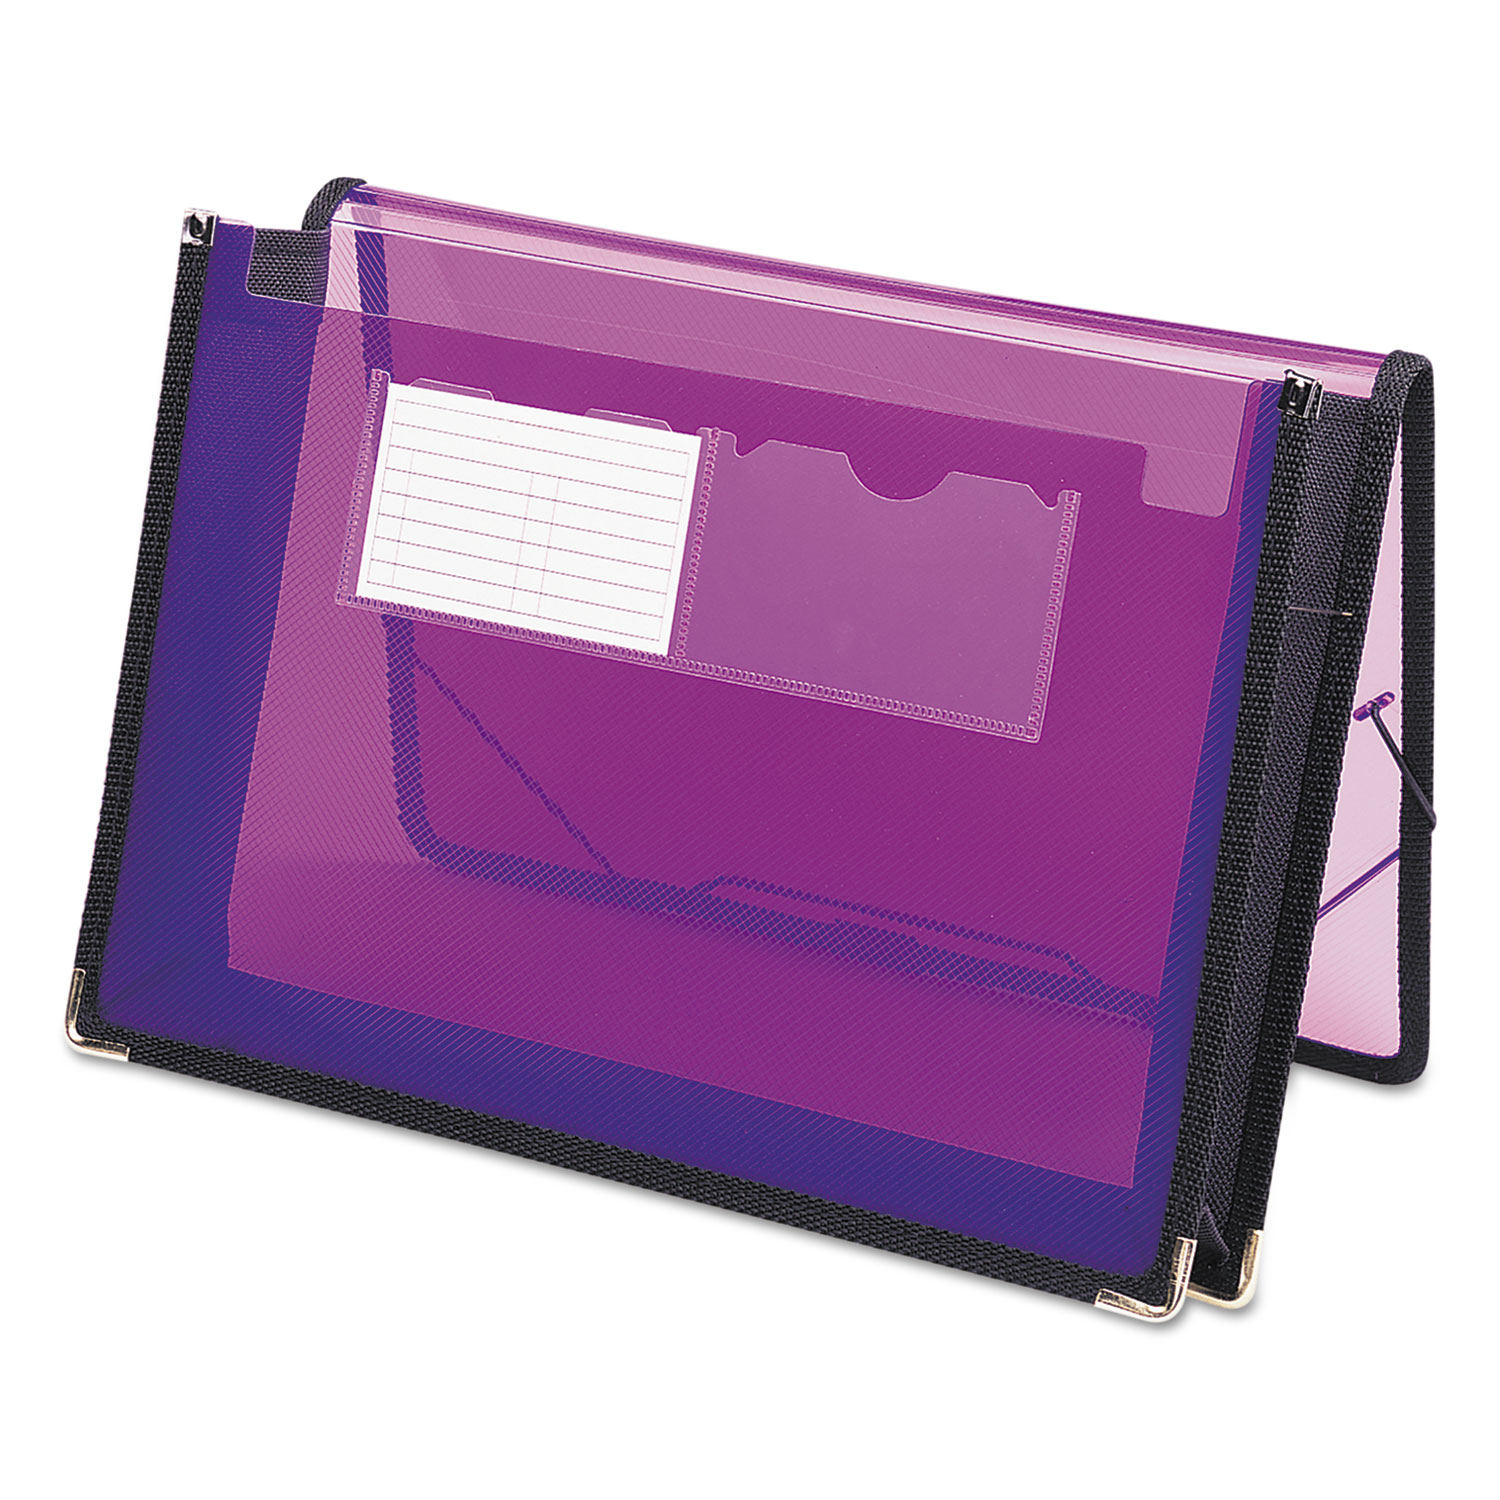  Smead 71952 Poly Wallets, 2.25 Expansion, 1 Section, Letter Size, Translucent Purple (SMD71952) 